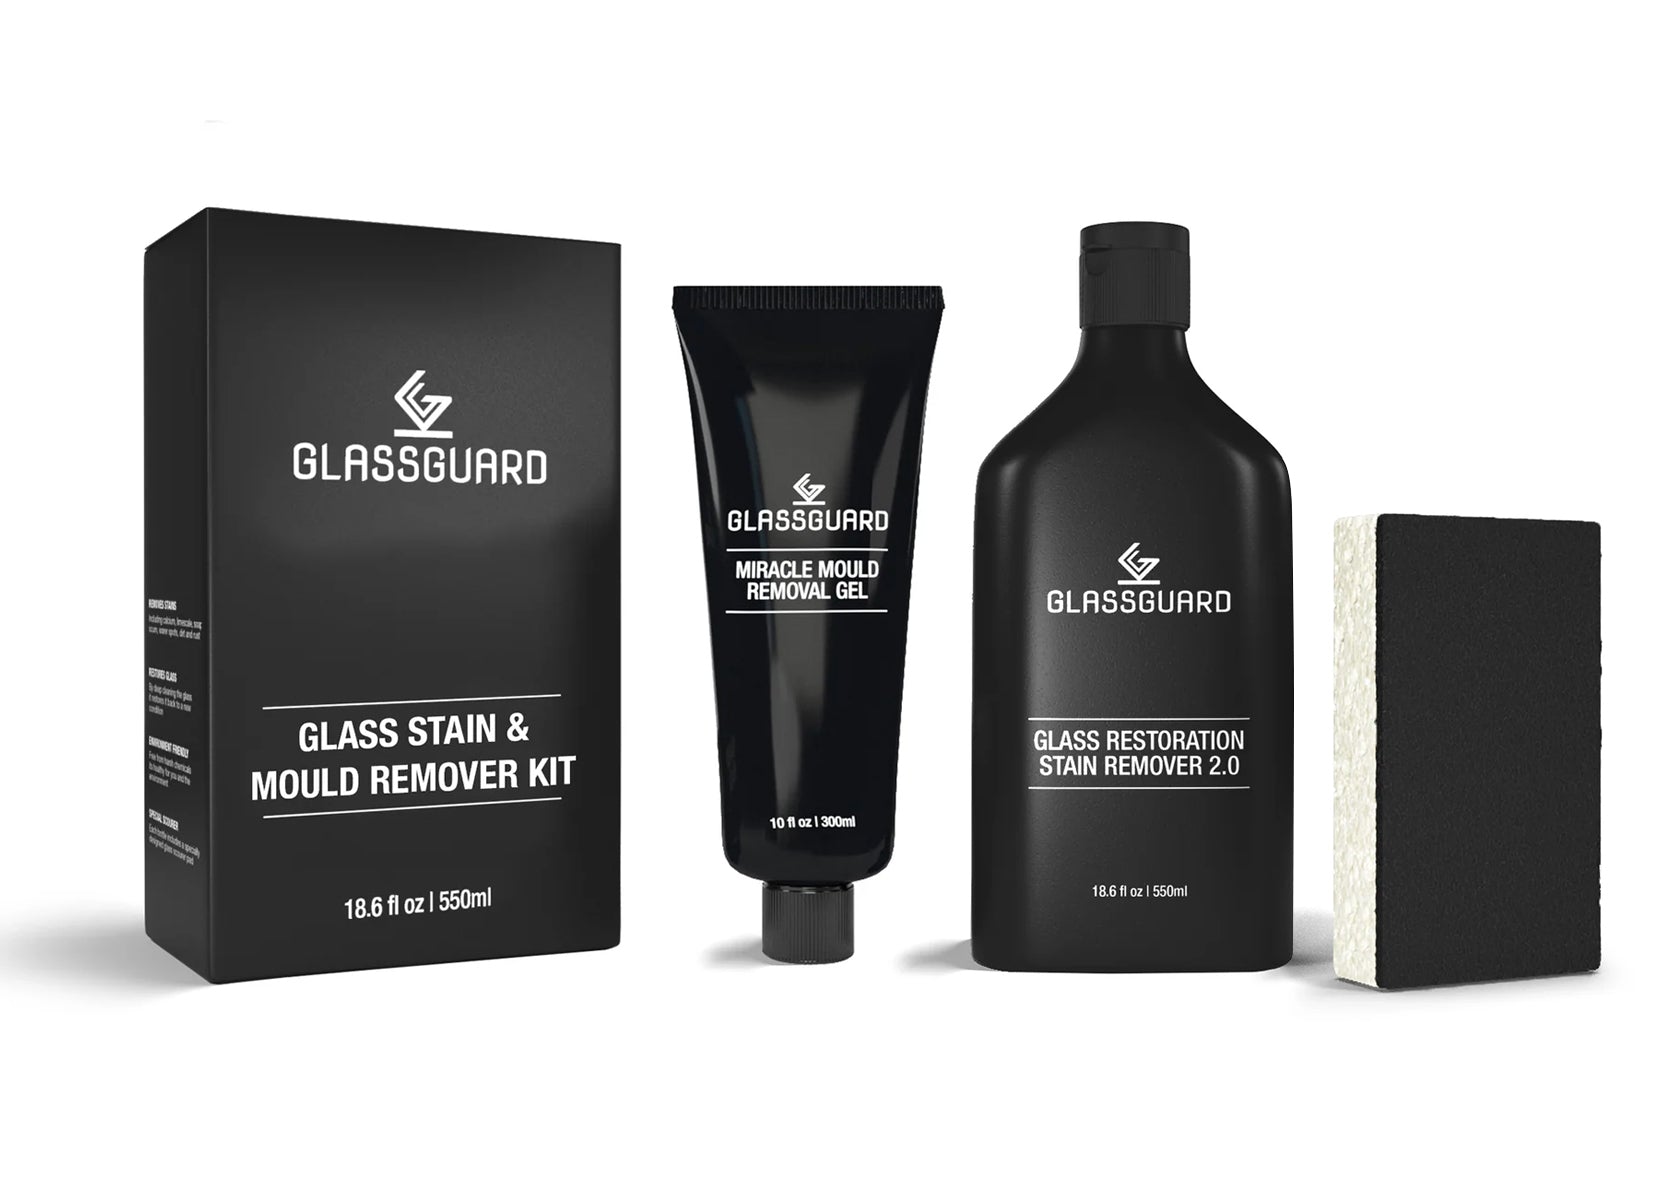 GLASSGUARD™ Glass Stain & Mould Remover Kit